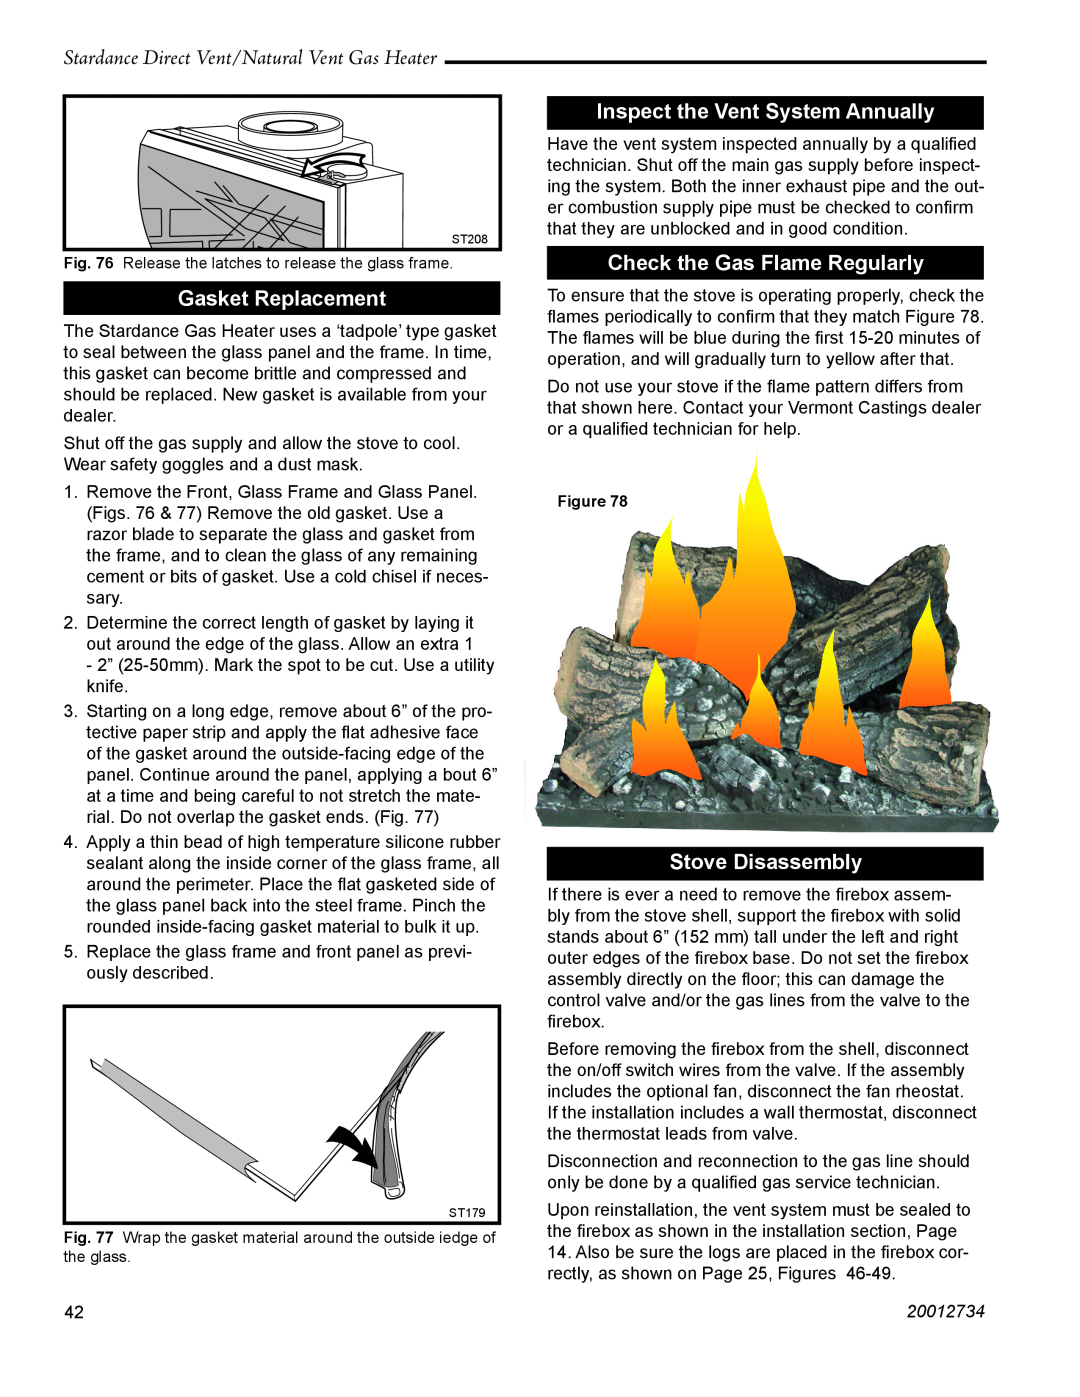 Vermont Casting SDDVTCVG Gasket Replacement, Inspect the Vent System Annually, Check the Gas Flame Regularly, 20012734 